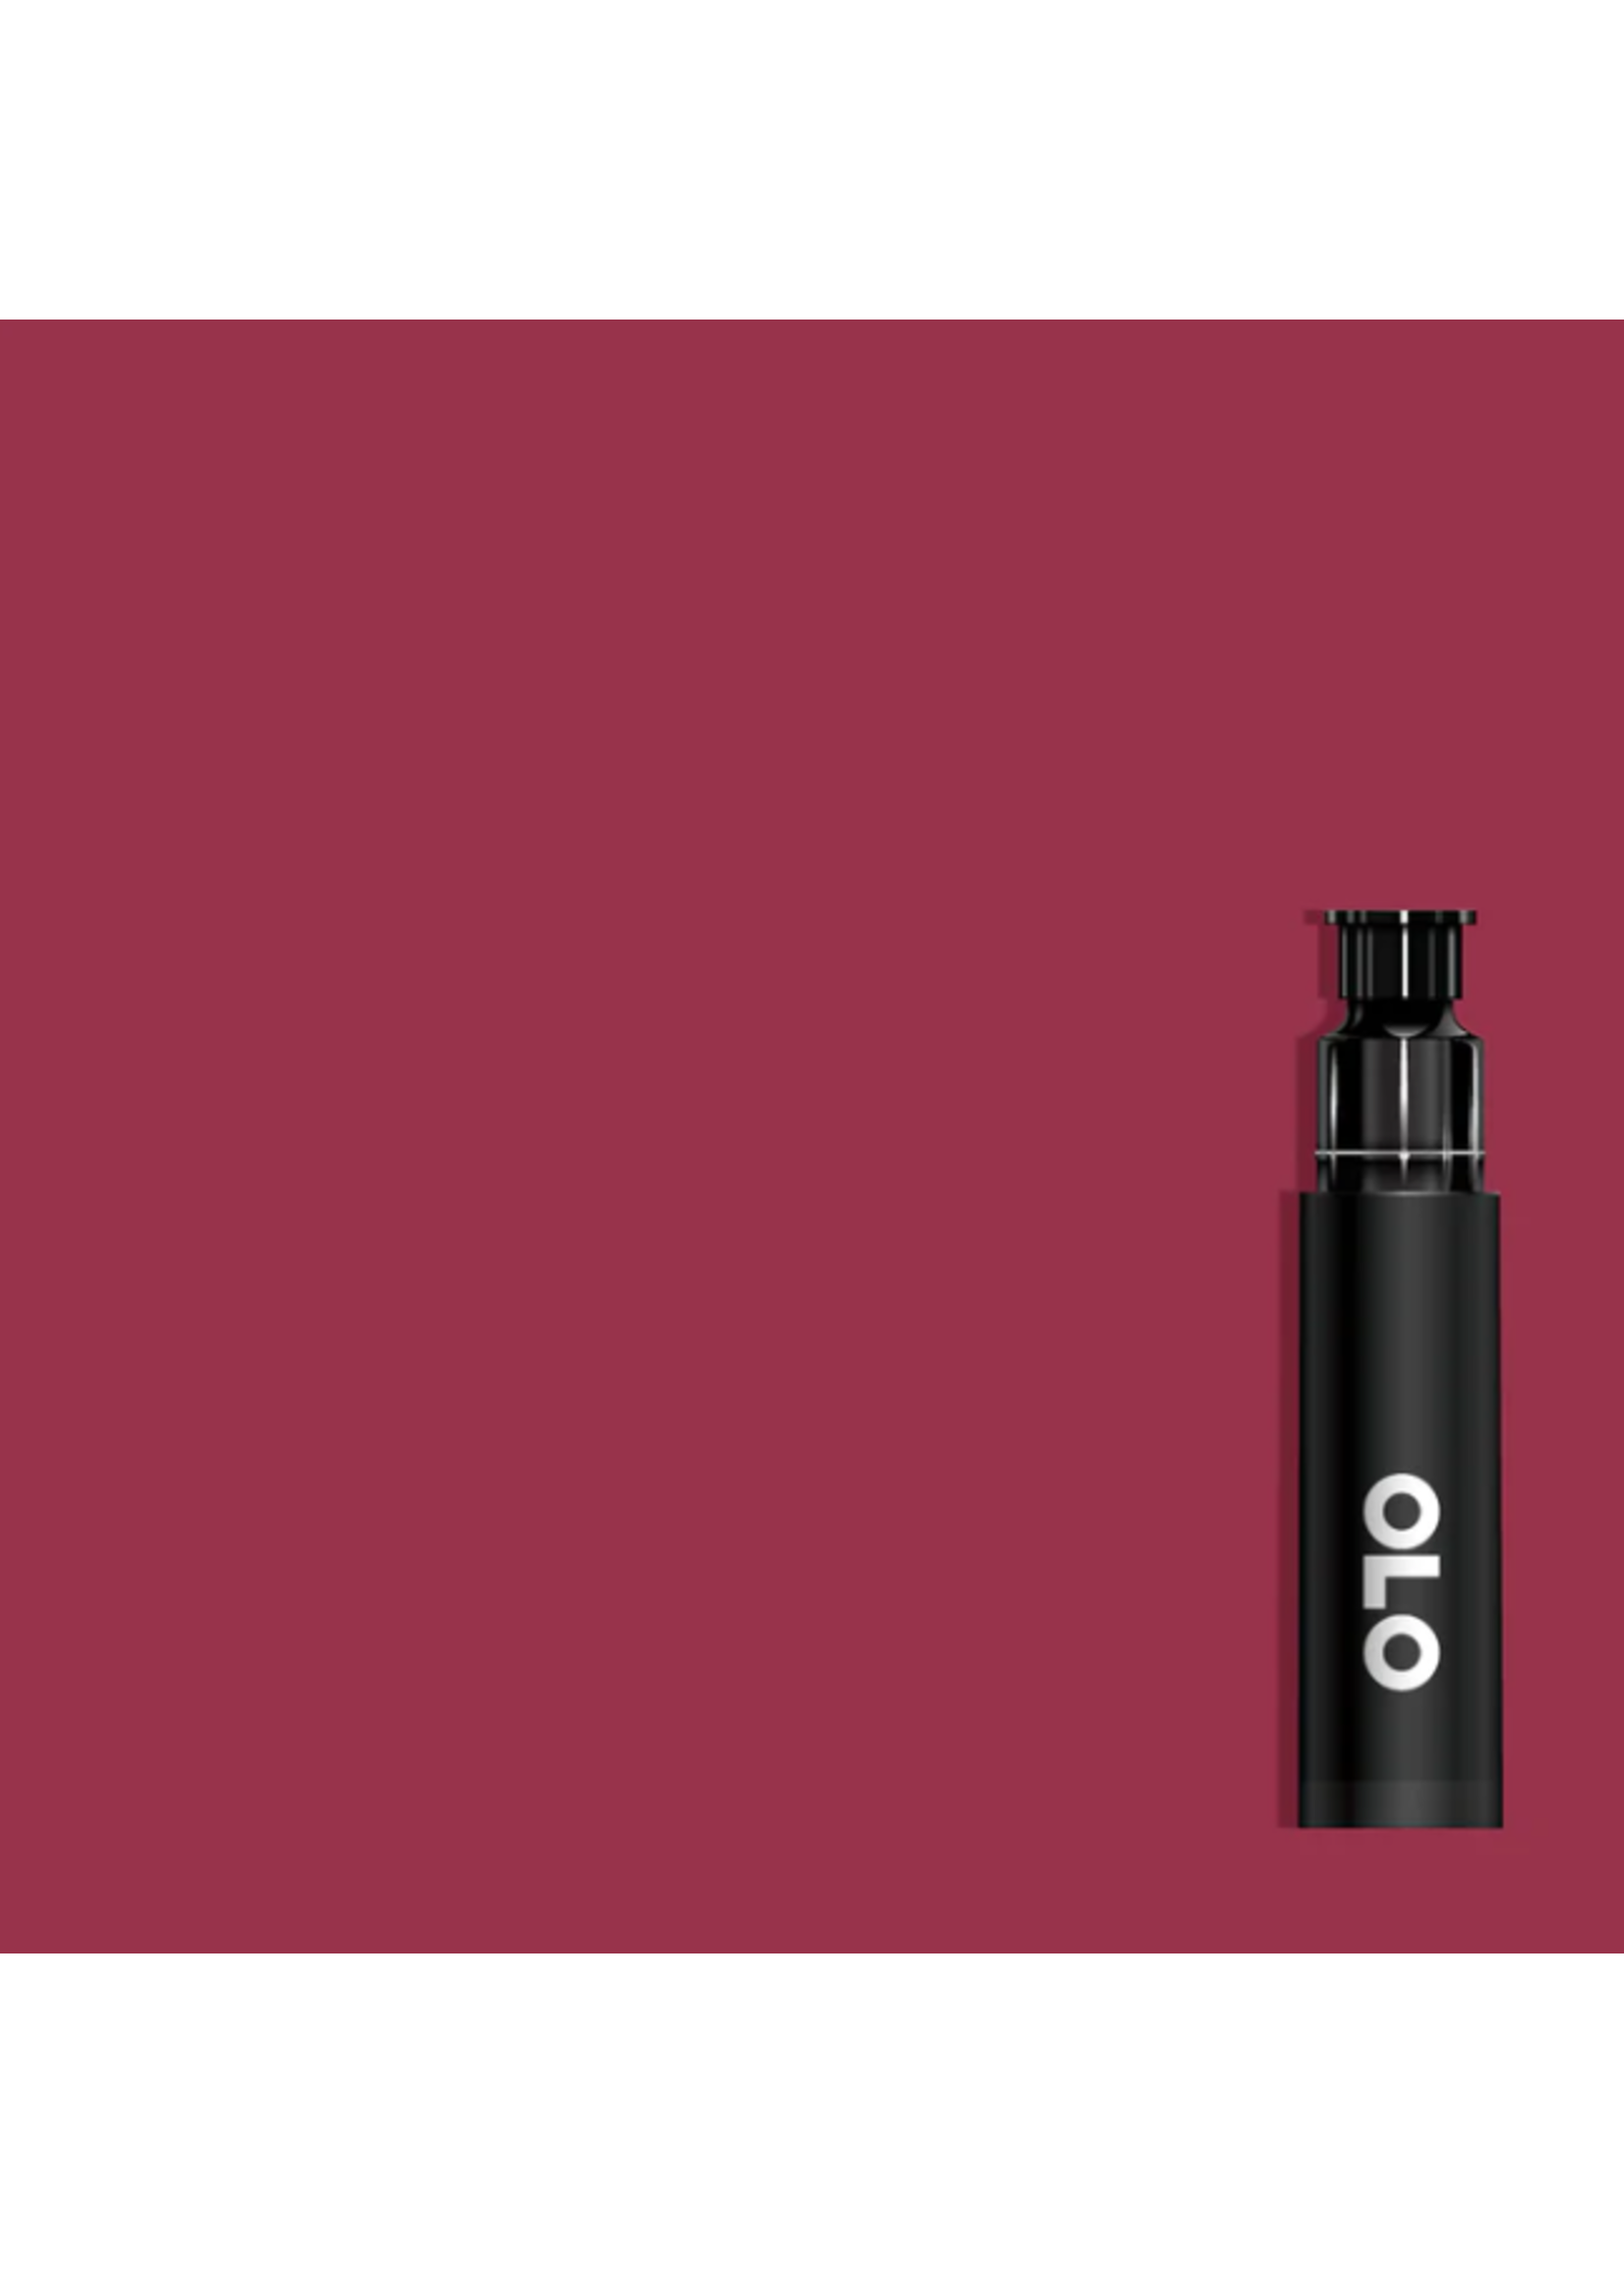 OLO OLO Brush Replacement Cartridge: Astilbe